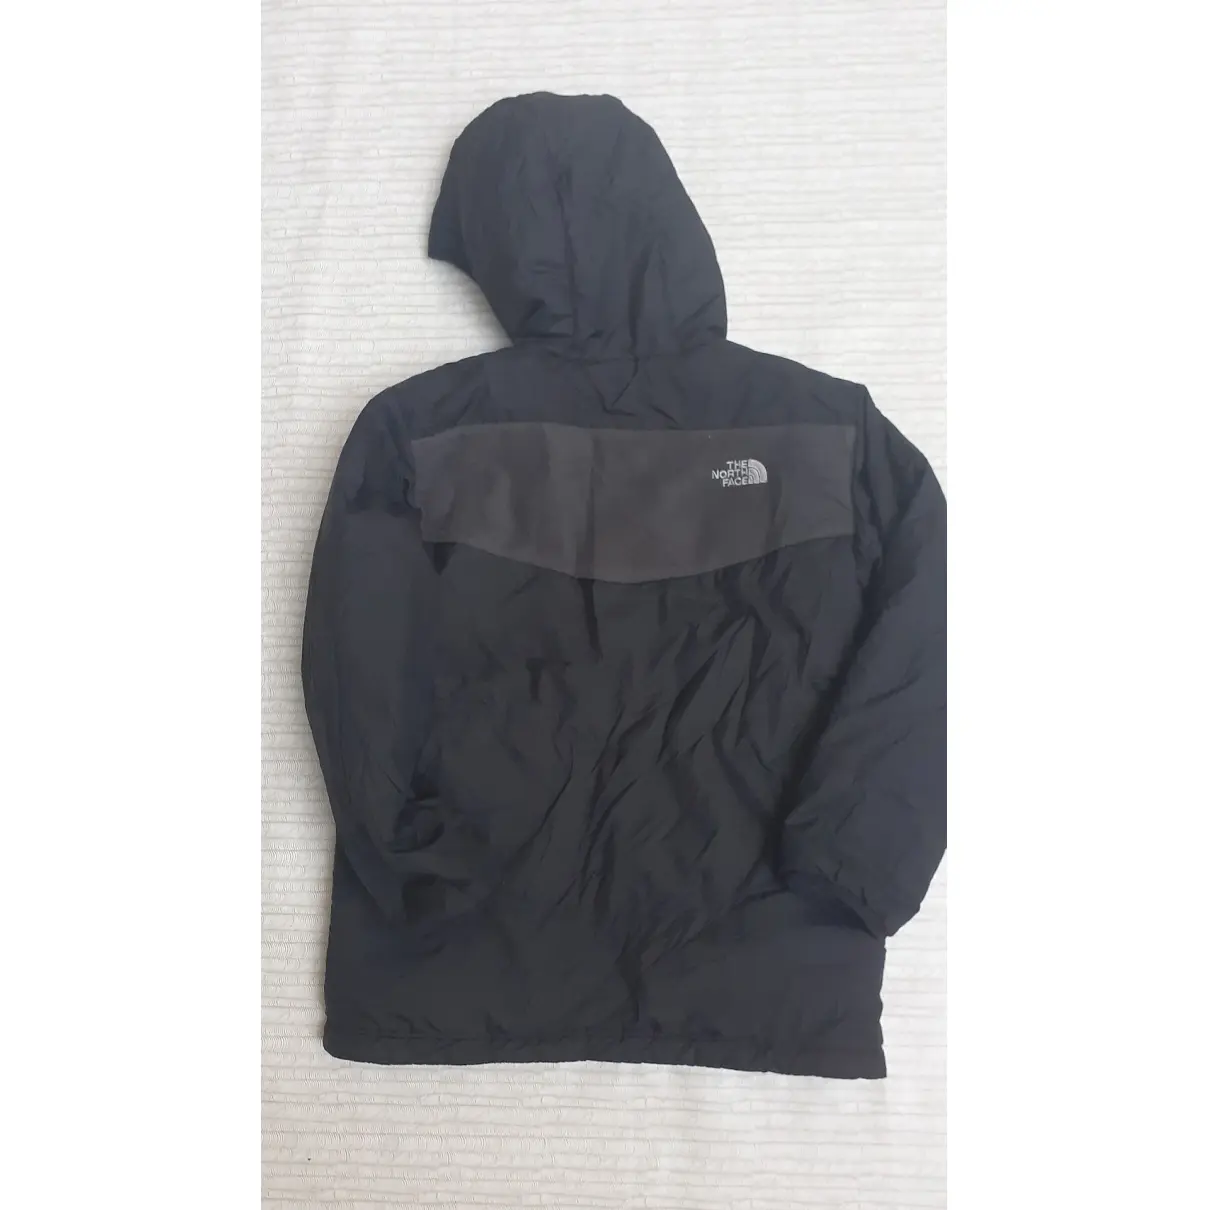 Luxury The North Face Jackets & Coats Kids